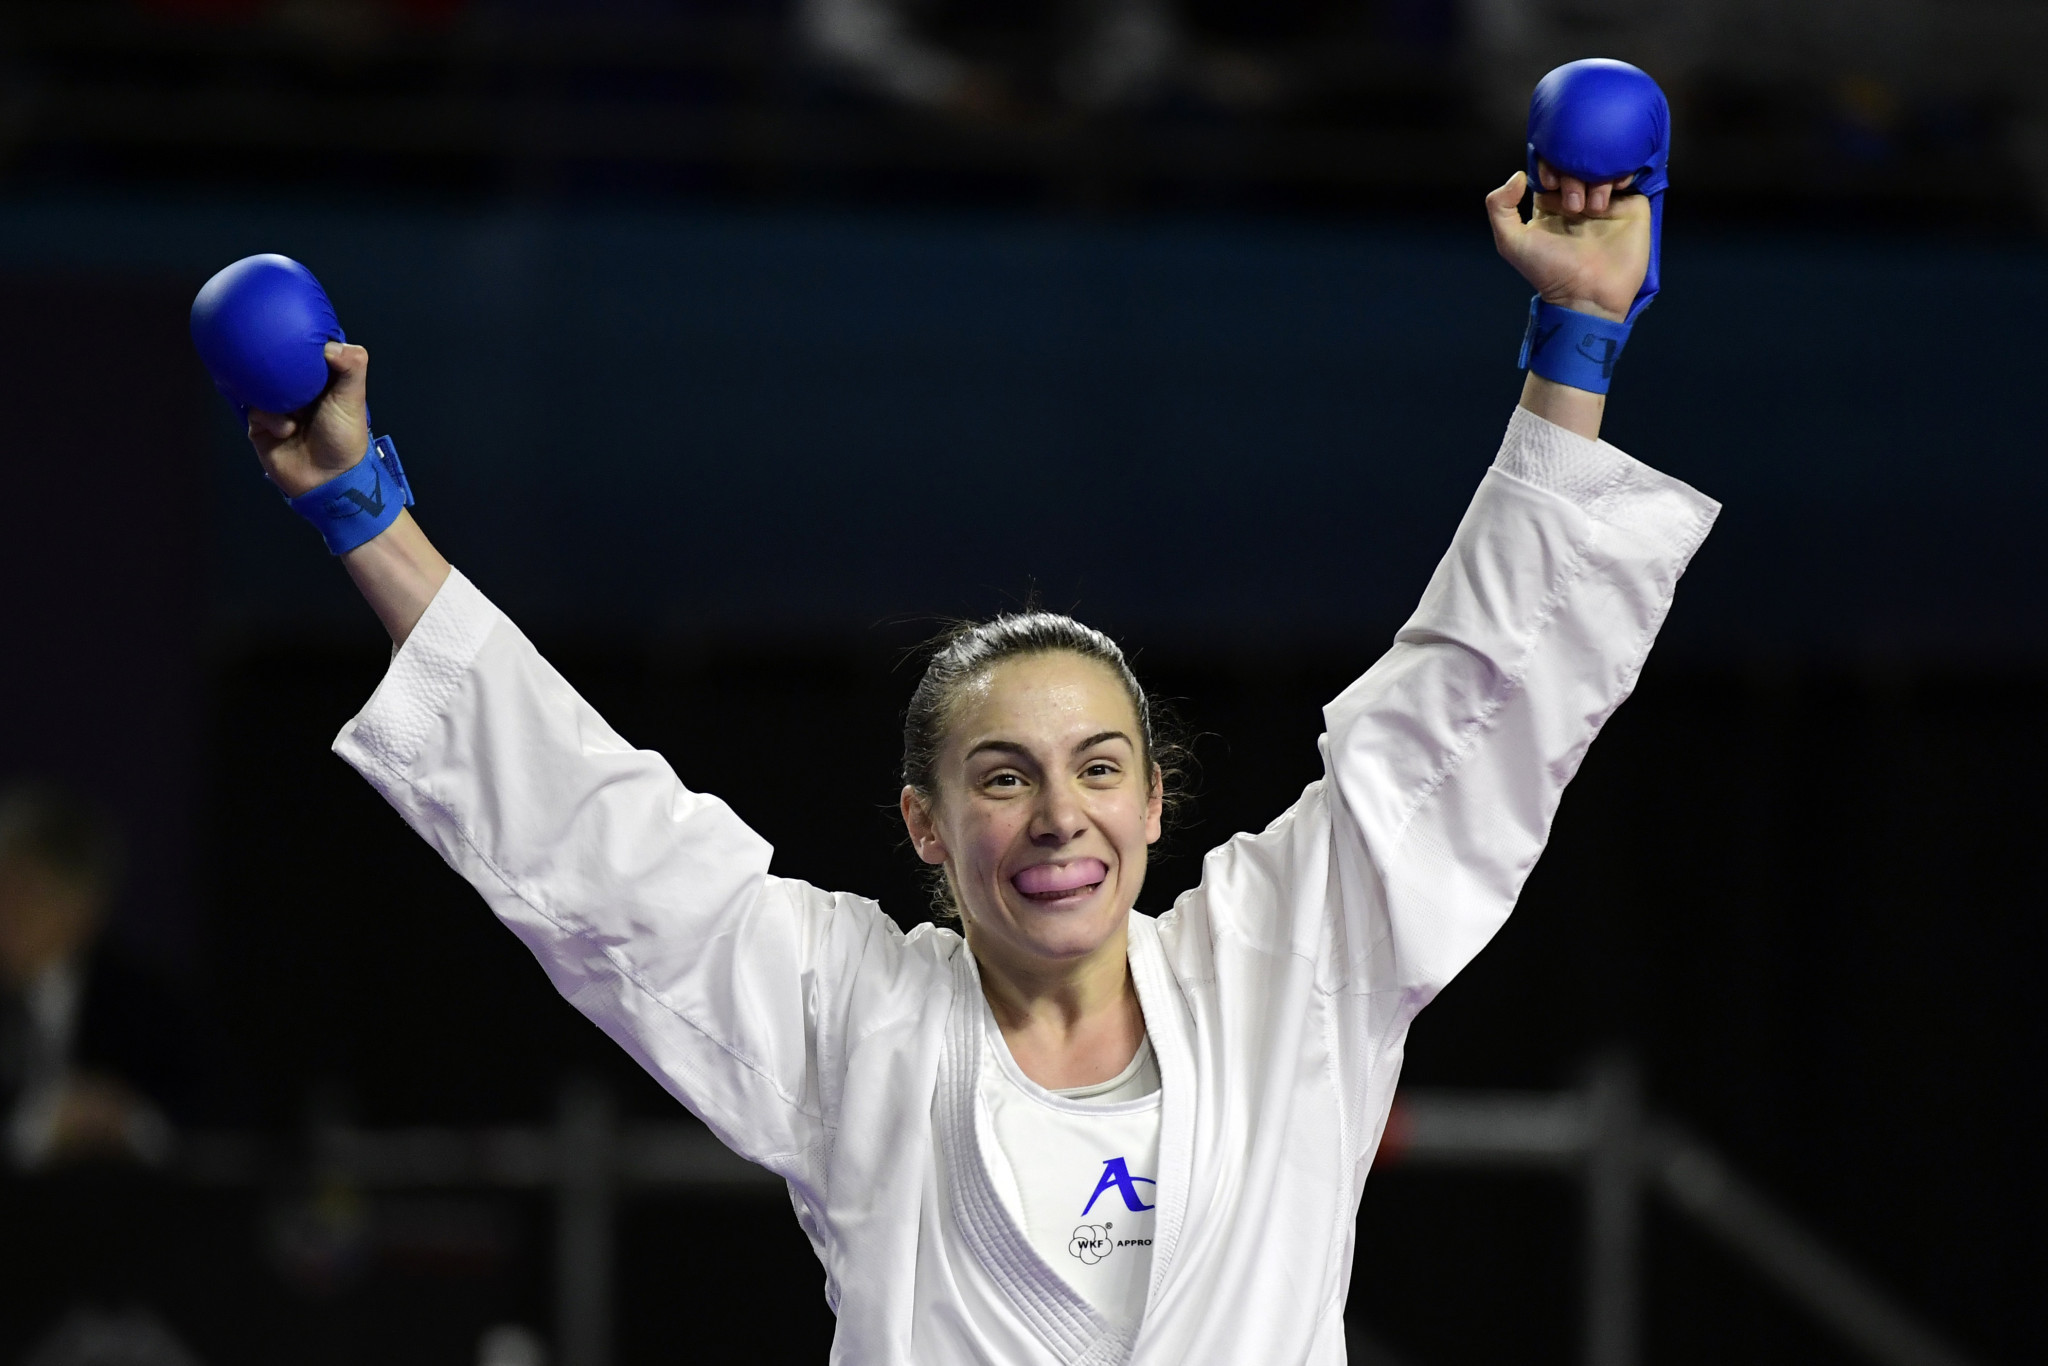 Jovana Prekovic of Serbia secured the gold medal in the women's under-61kg category ©Getty Images